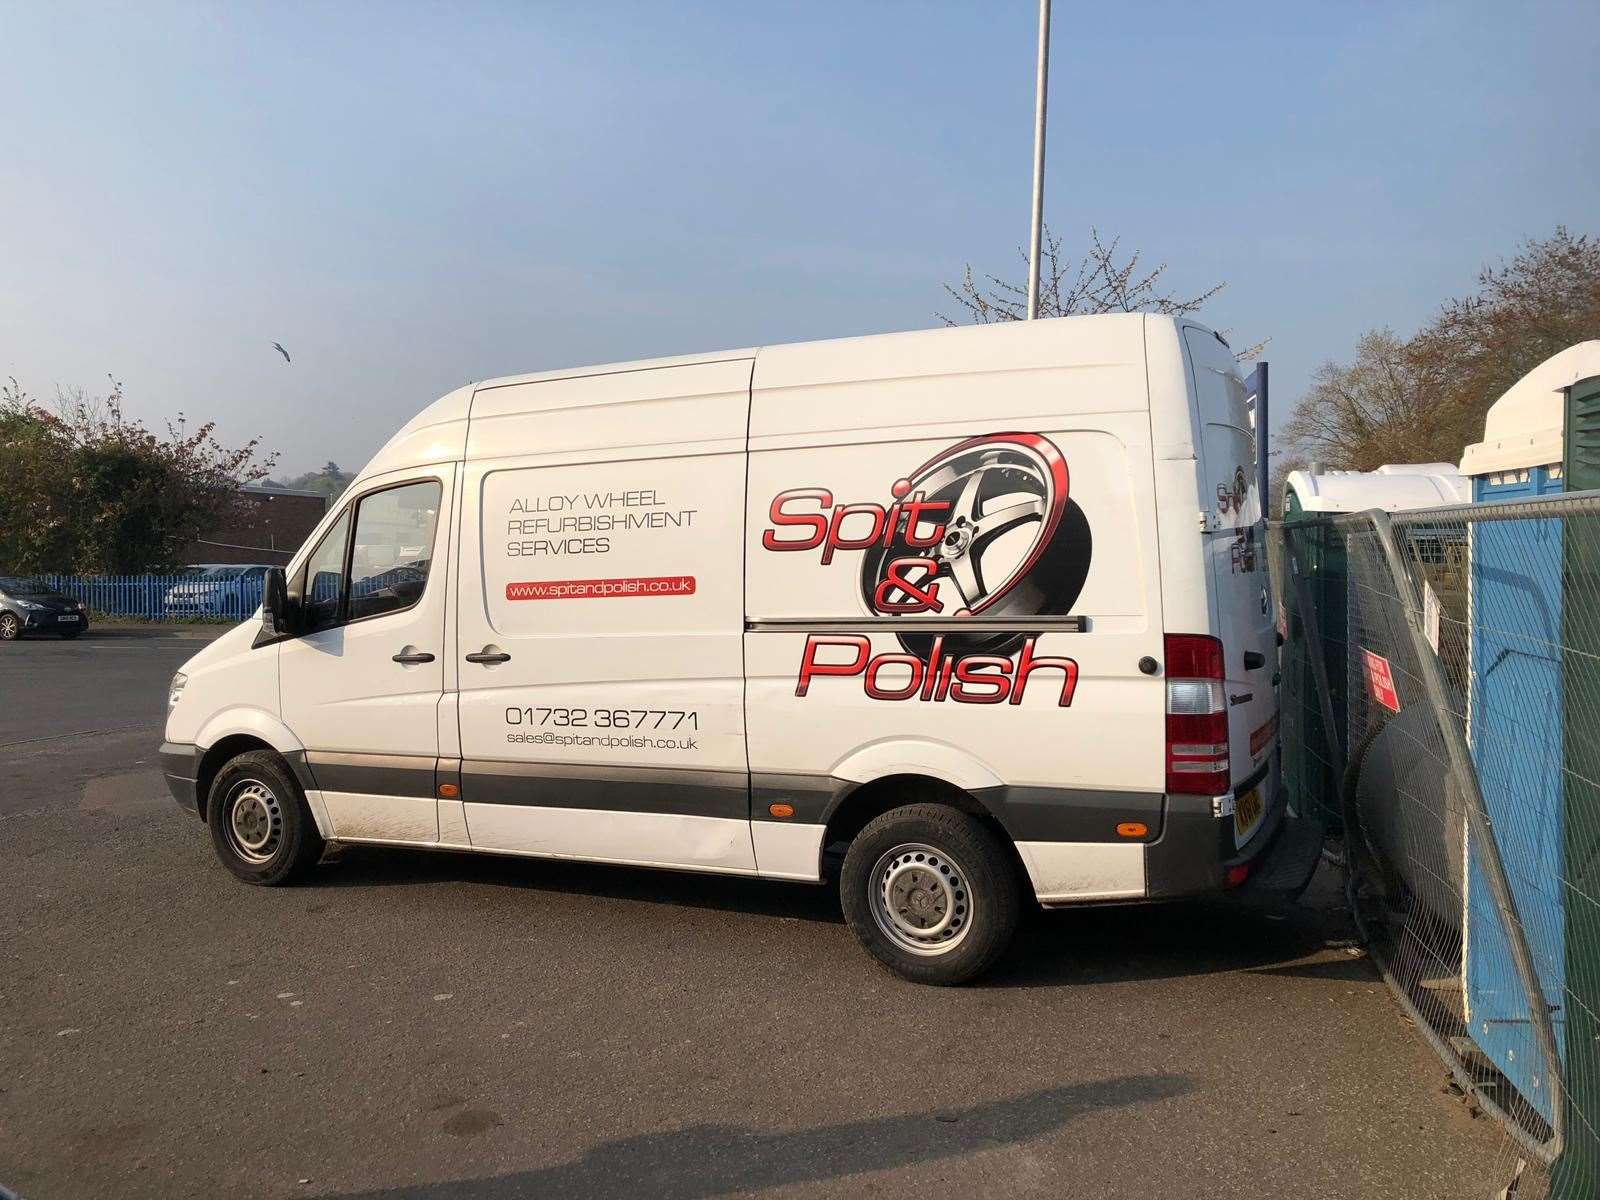 The van was stolen in the early hours of this morning